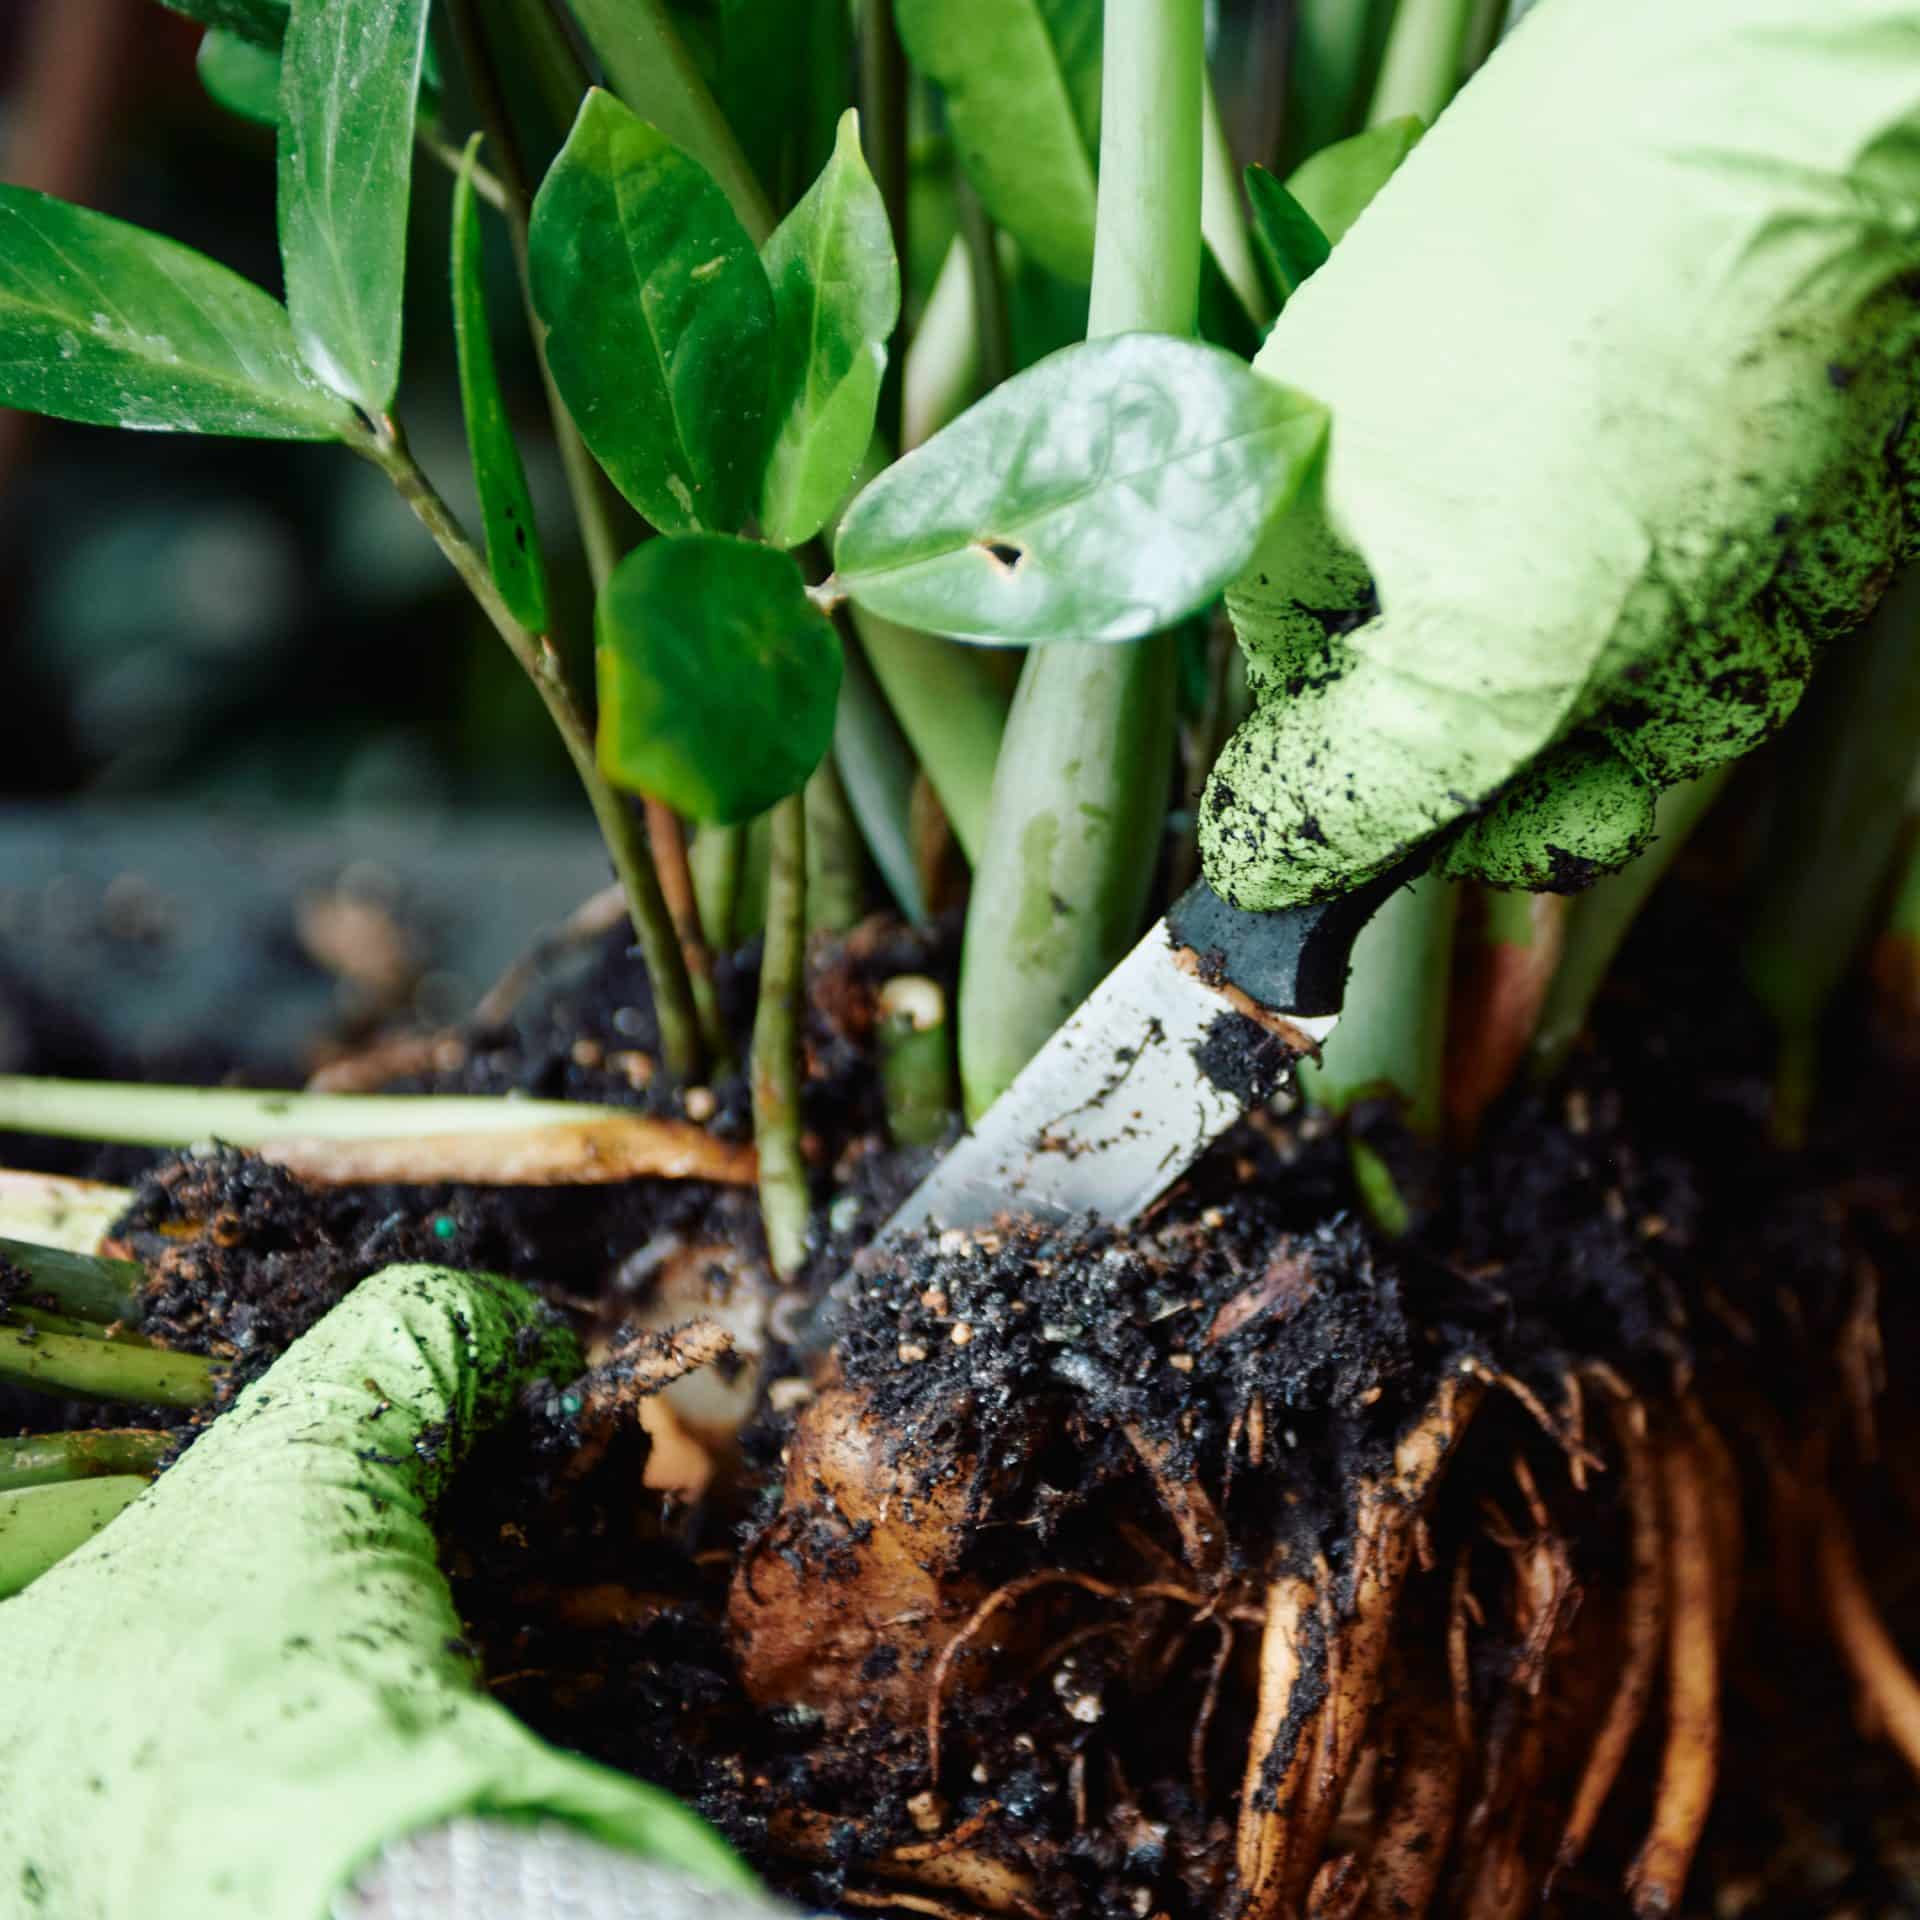 Detailed view of a gardener's gloved hands using a sharp knife to carefully separate the rhizomes of a ZZ plant. The image captures the action of cutting through dense roots and moist soil, with the focus on the blade and the roots. The background features the vibrant green leaves and stems of the plant.